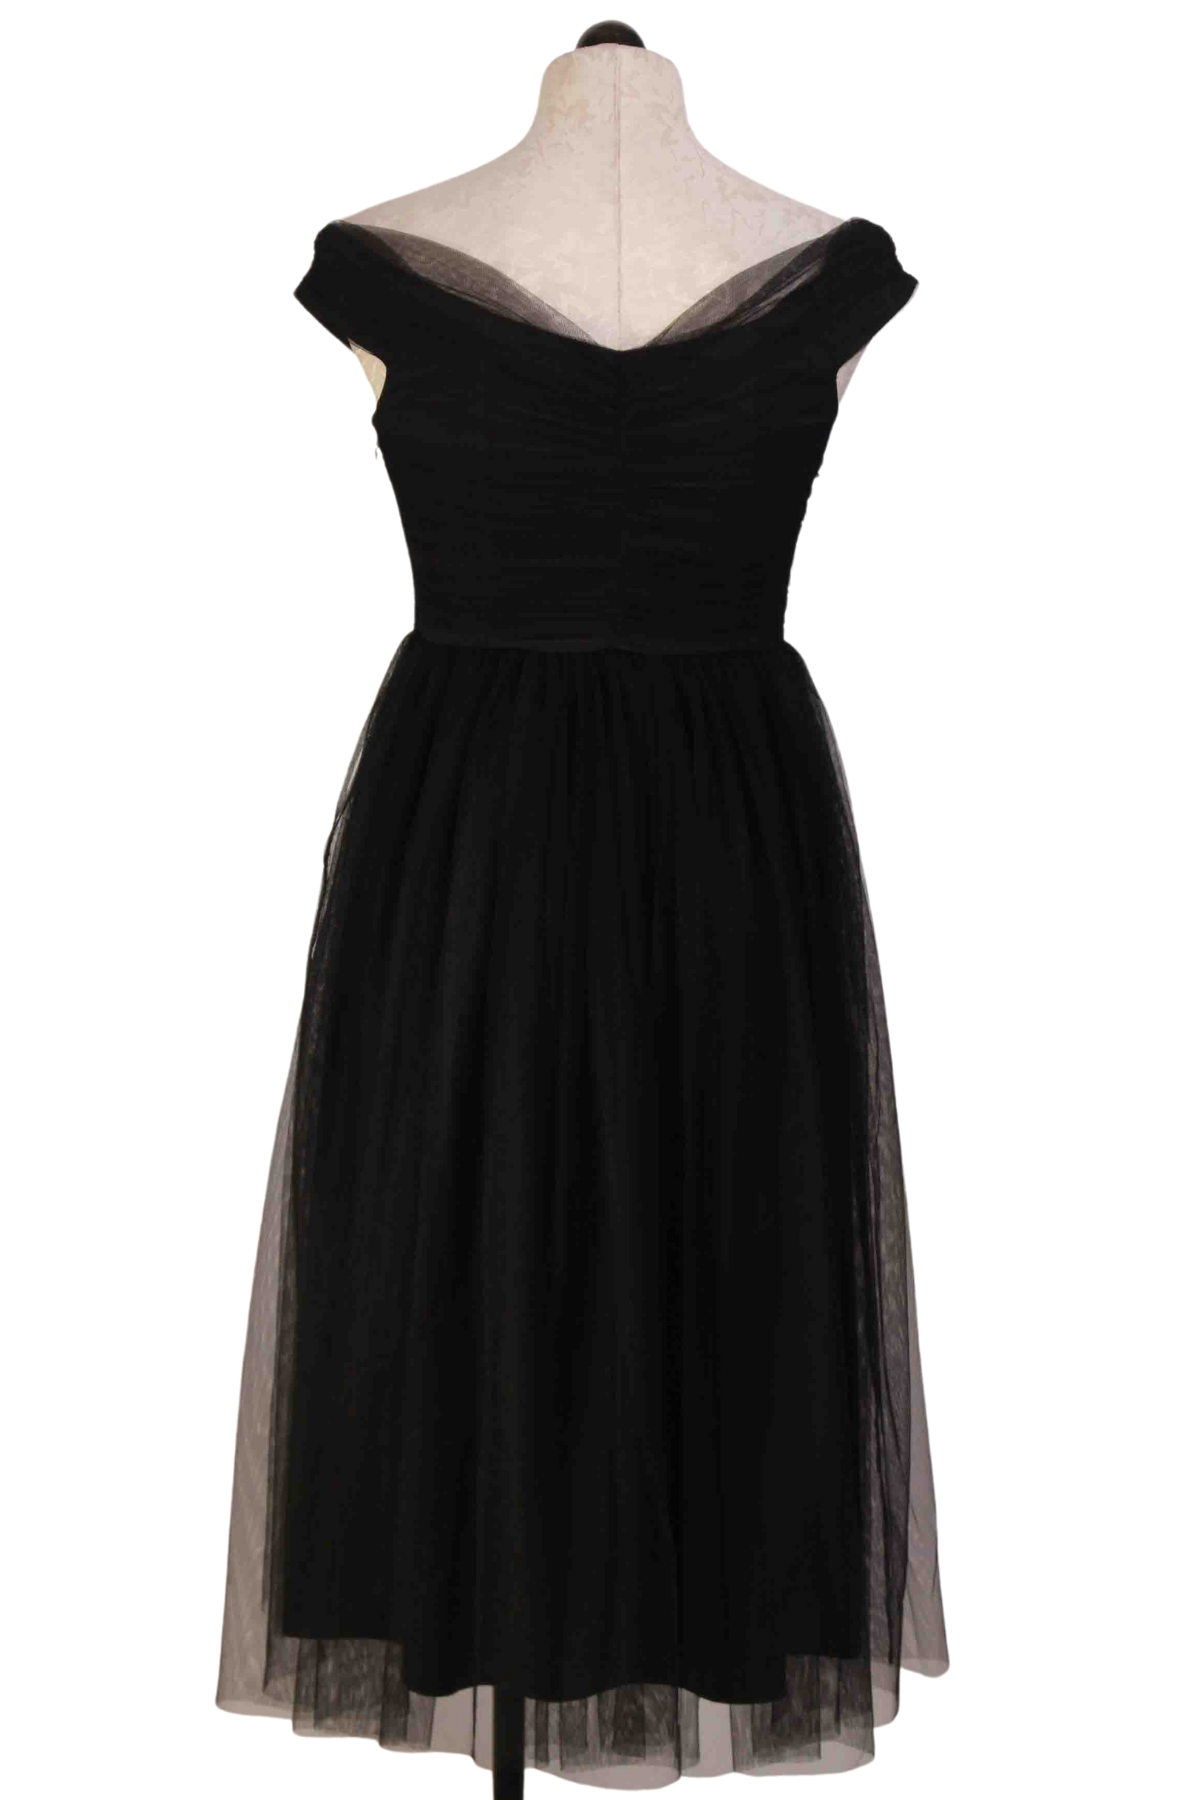 back view of black Off-the-Shoulder Tulle Renai Dress by Trina Turk